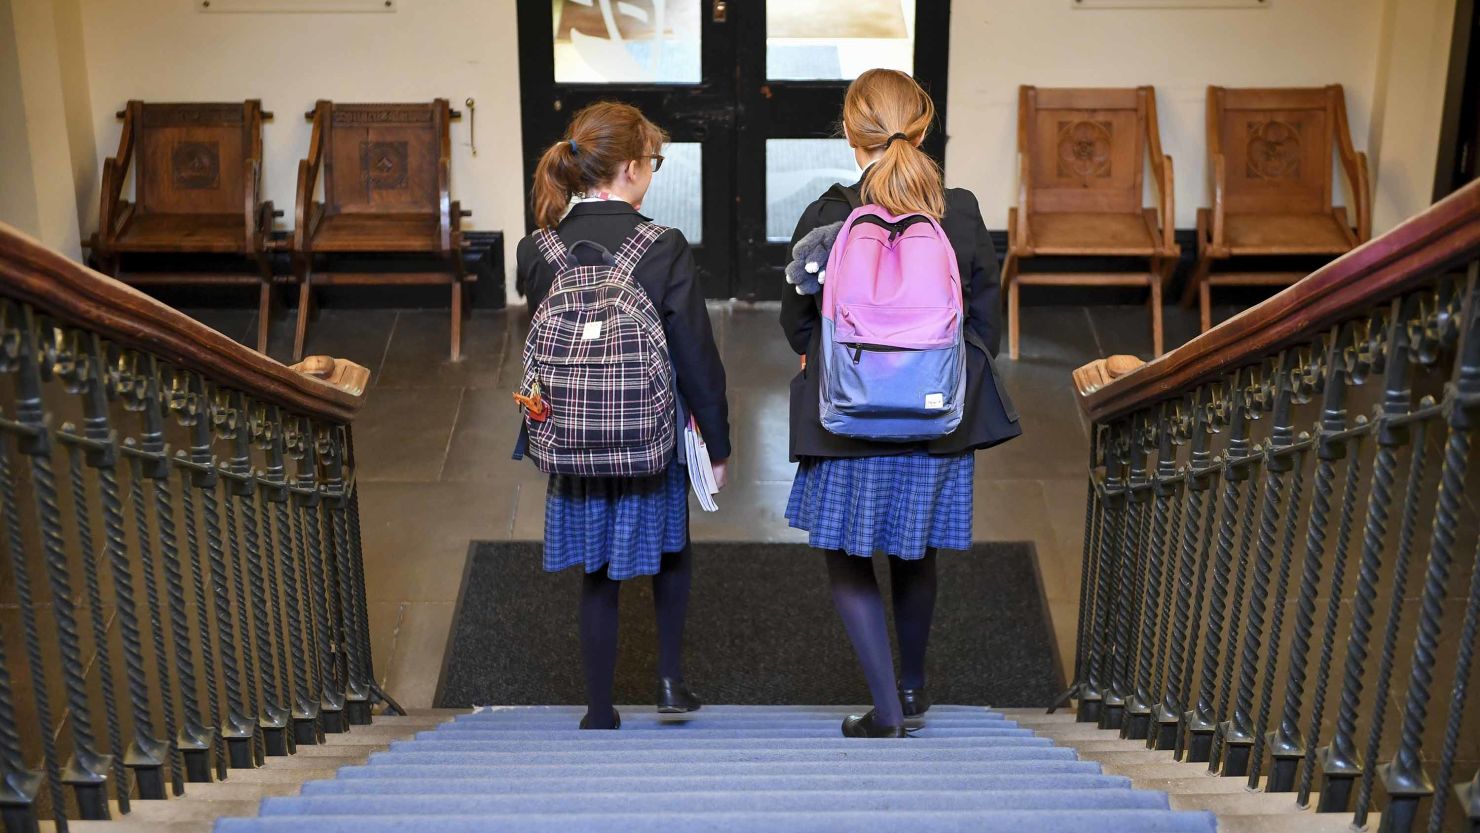 A third of UK schoolgirls are sexually harassed while wearing a uniform, research by children's charity Plan International UK found. 